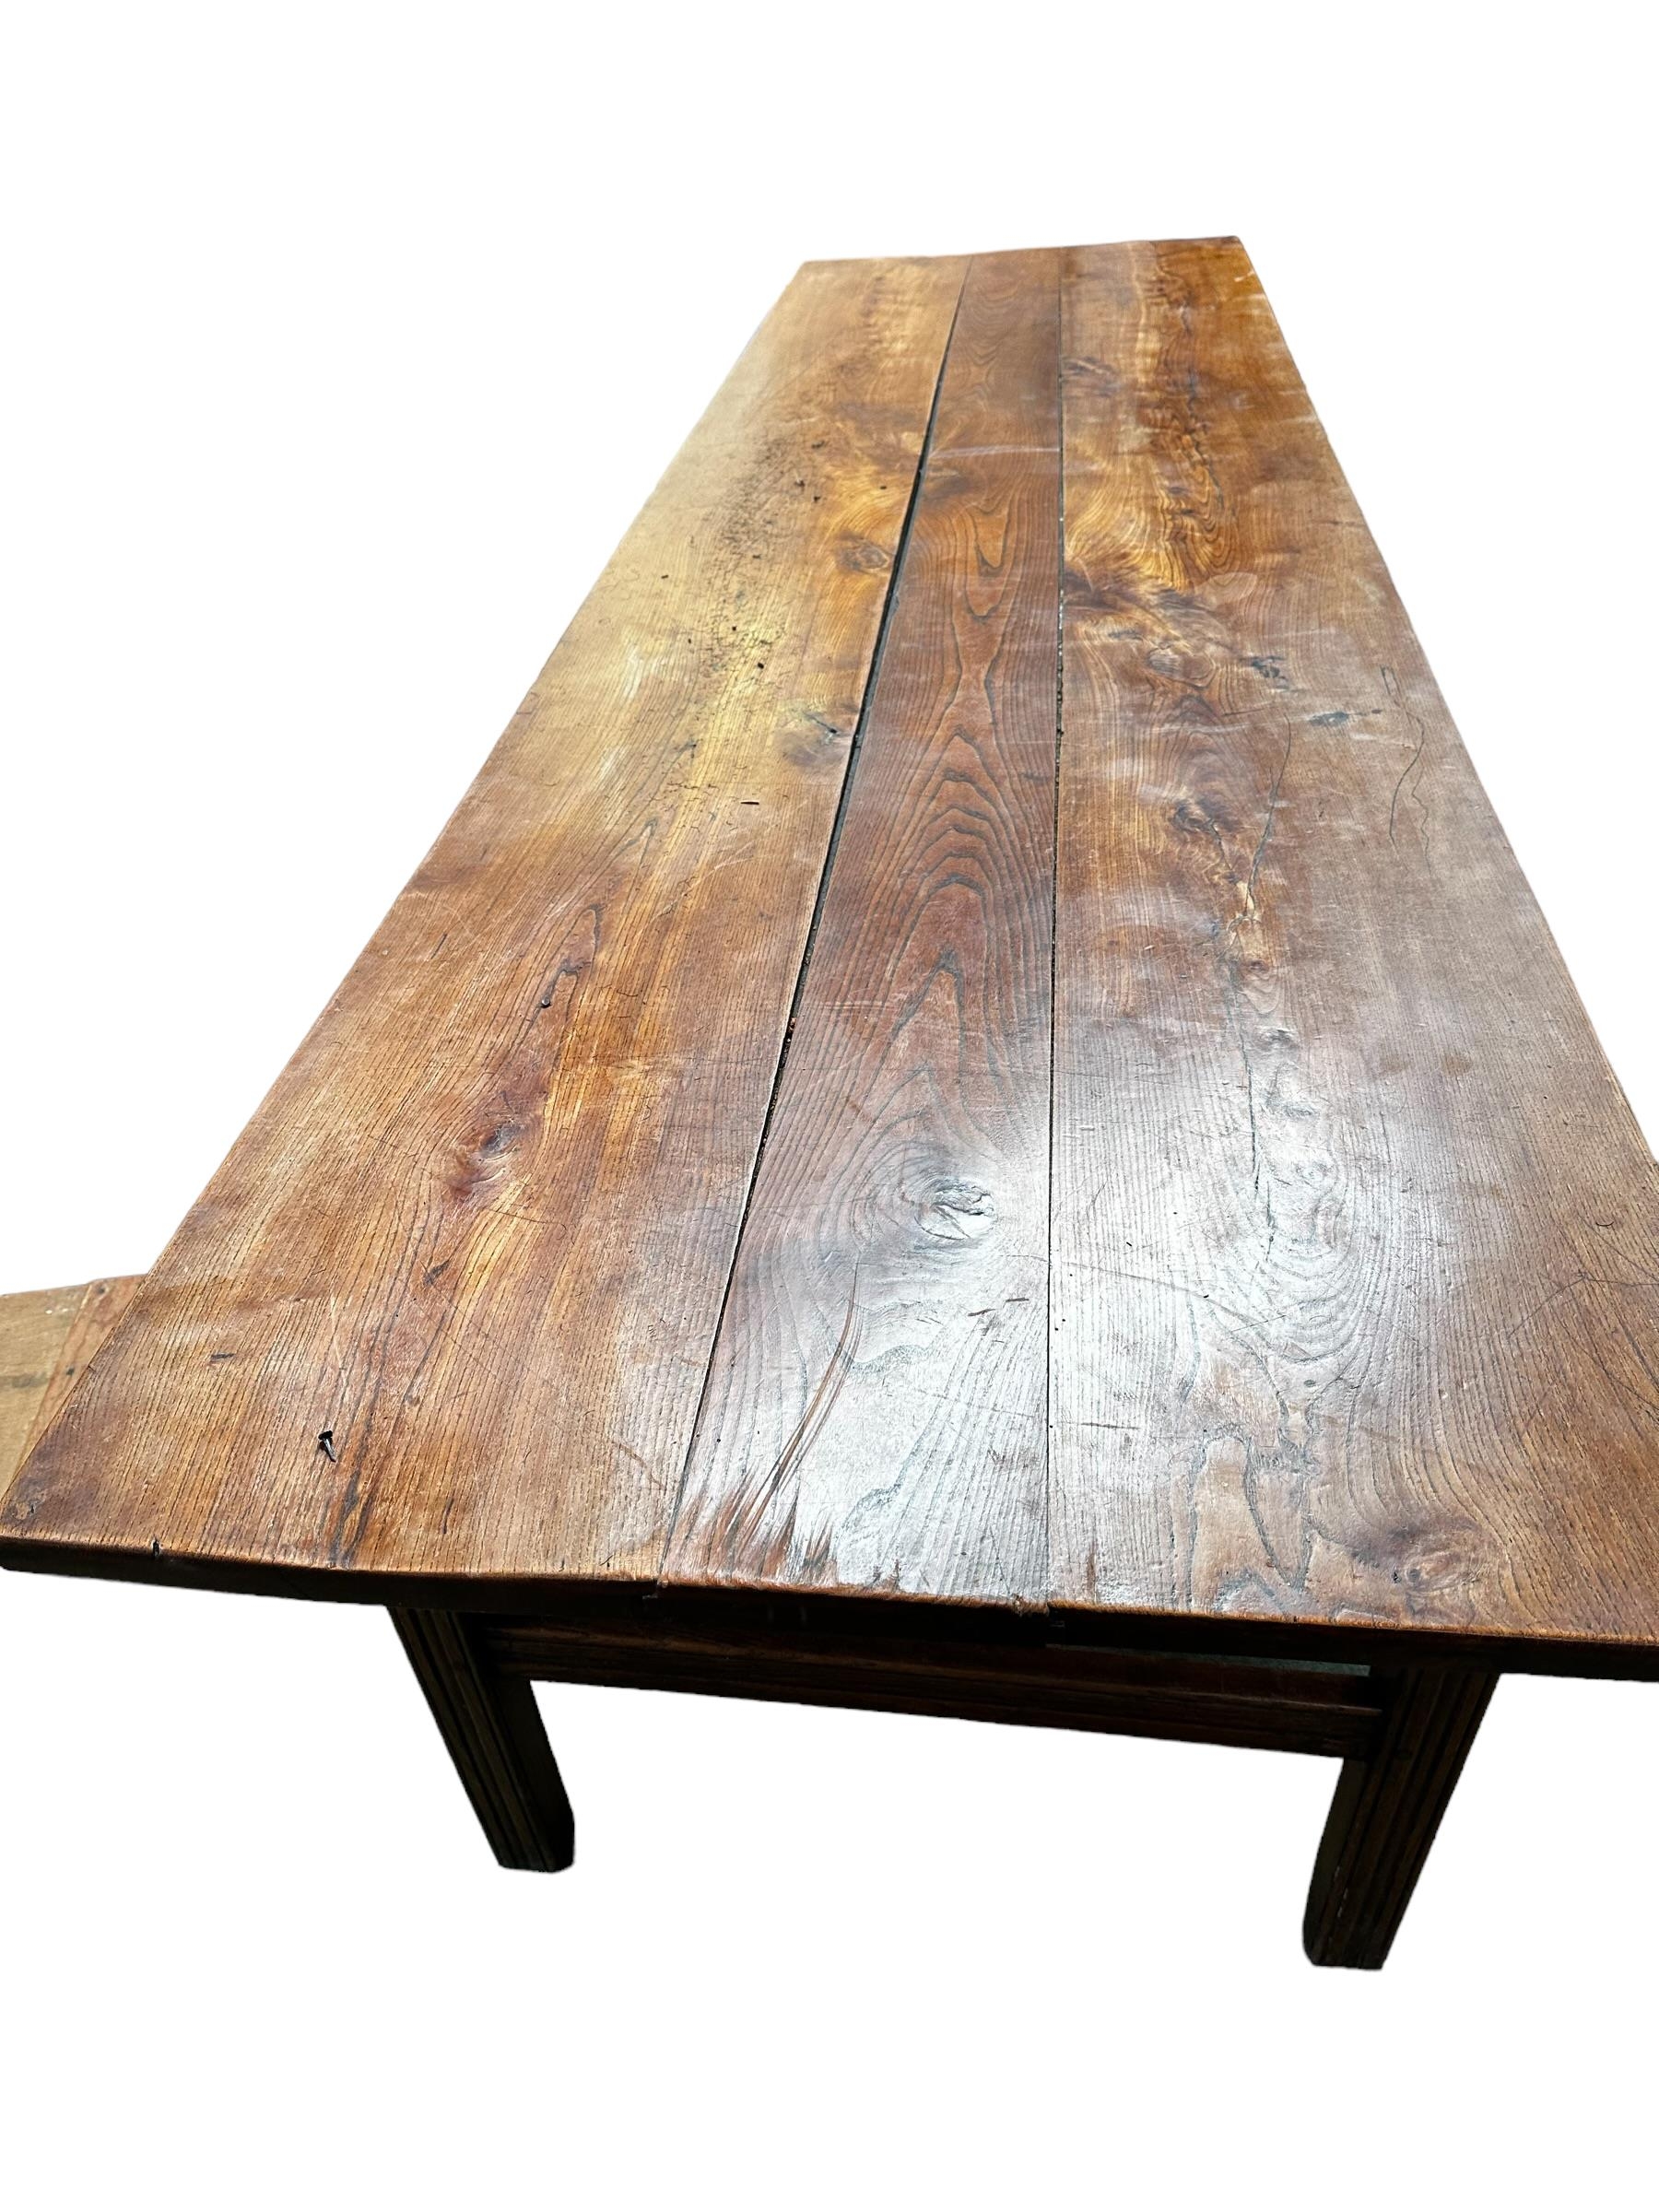 An C18th and later, French fruitwood refectory table, some wear and character, with much use, see - Image 2 of 3